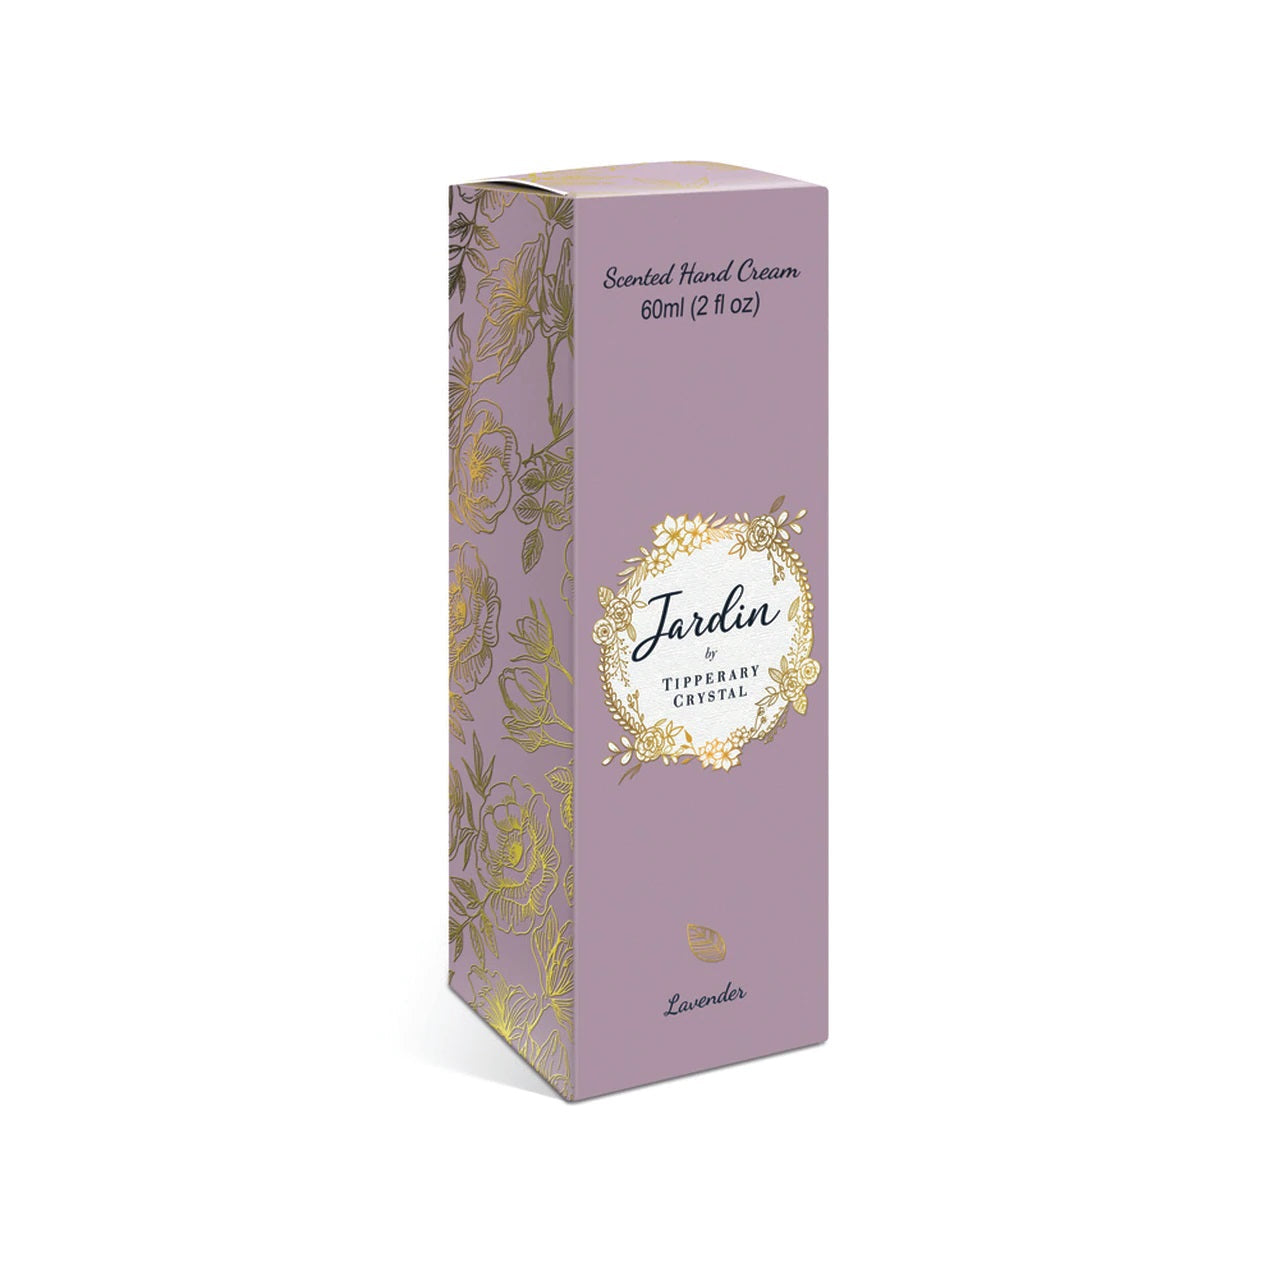 Tipperary Crystal Jardin Handcream - Lavender  Gorgeous Jardin handcreams from Tipperary Crystal are the ultimate pampering treats and would make a lovely gift for someone special. They come presented in a beautiful box. 